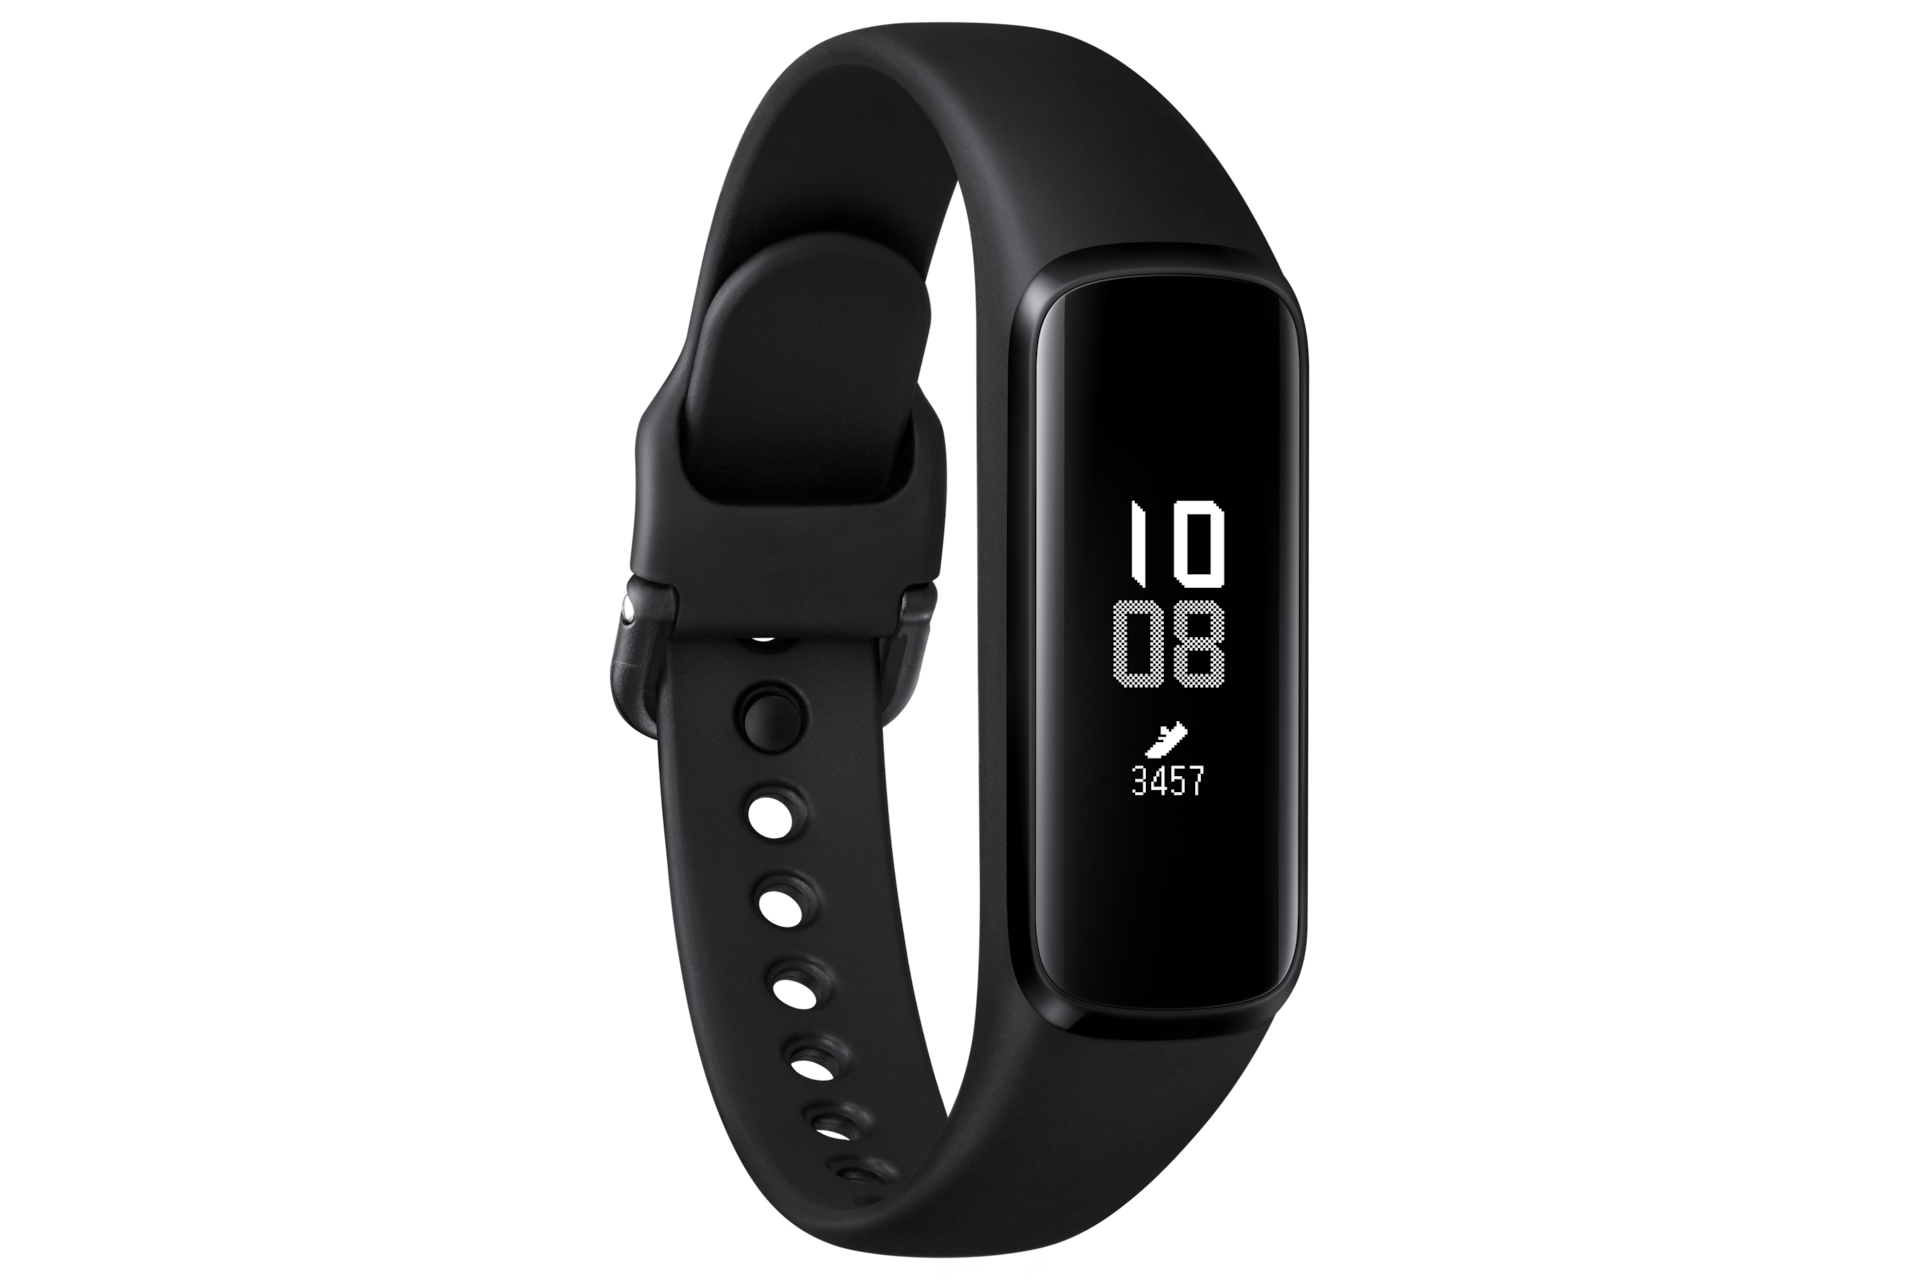 Samsung Galaxy Fit-e (2019) Price in Malaysia, Specs & Reviews